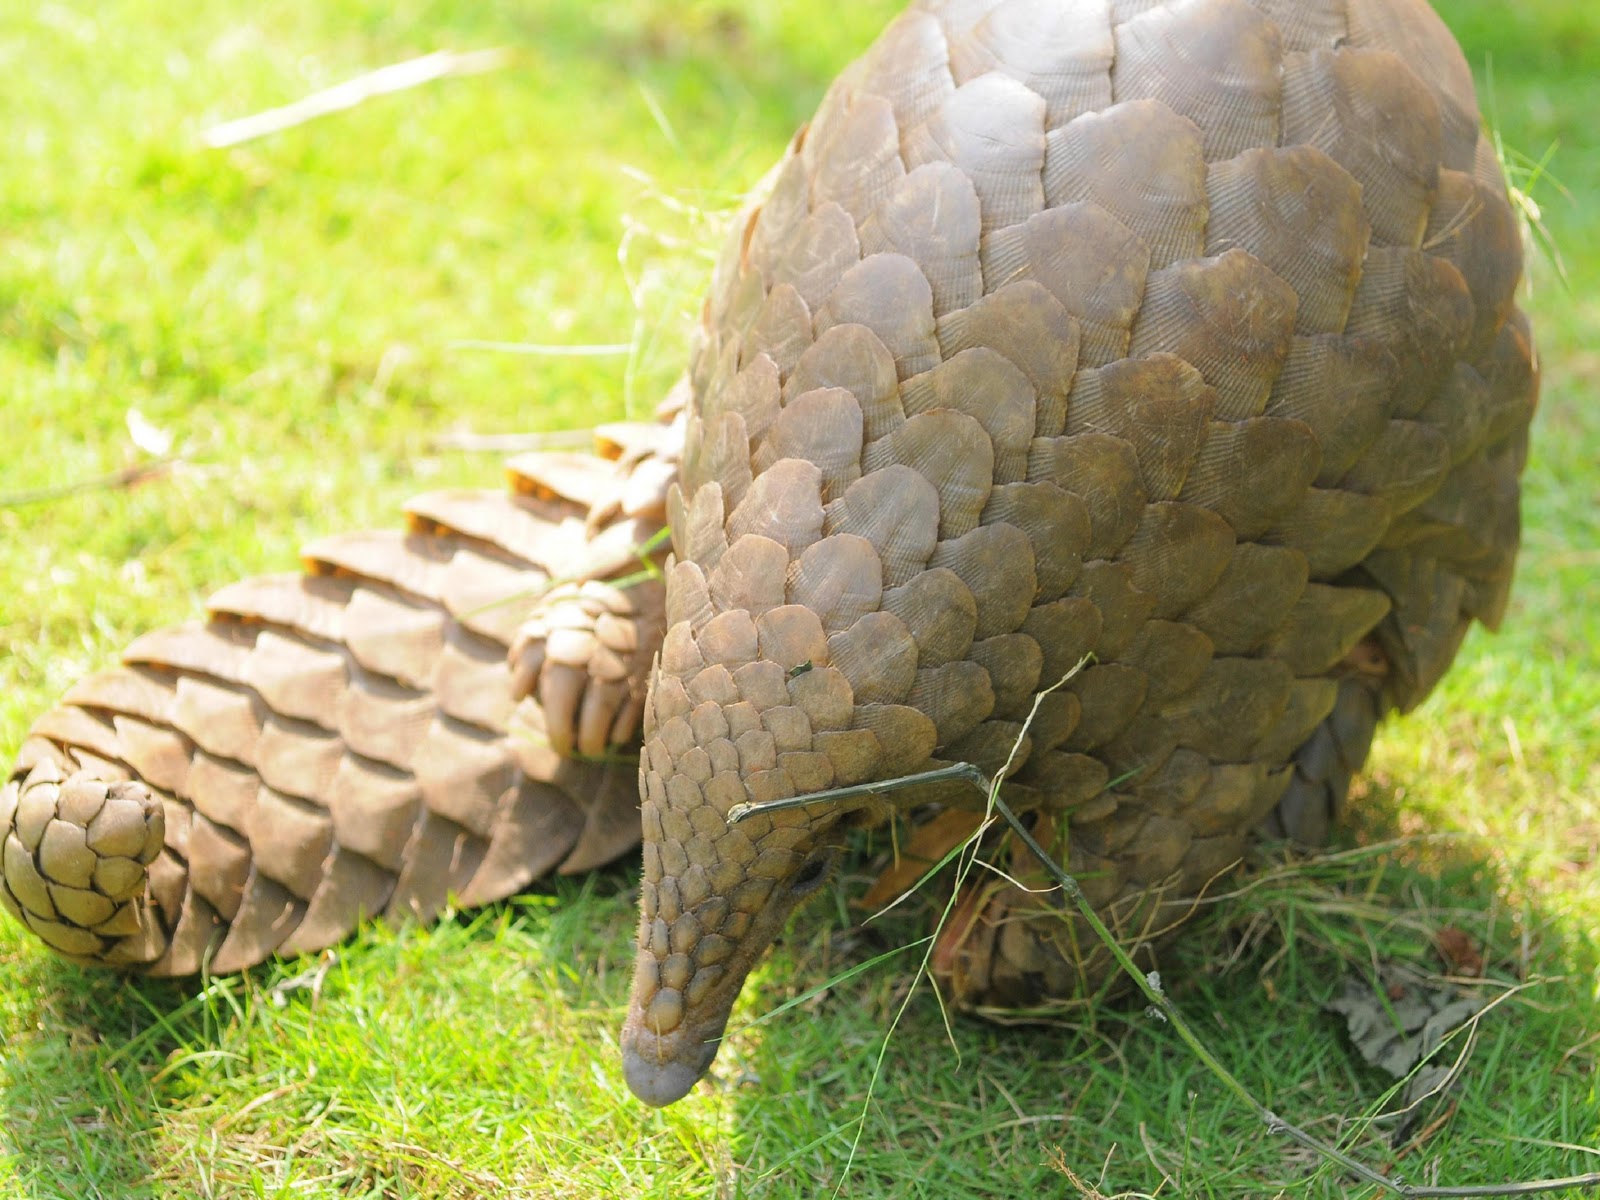 ENCYCLOPEDIA OF ANIMAL FACTS AND PICTURES: Pangolins1600 x 1200